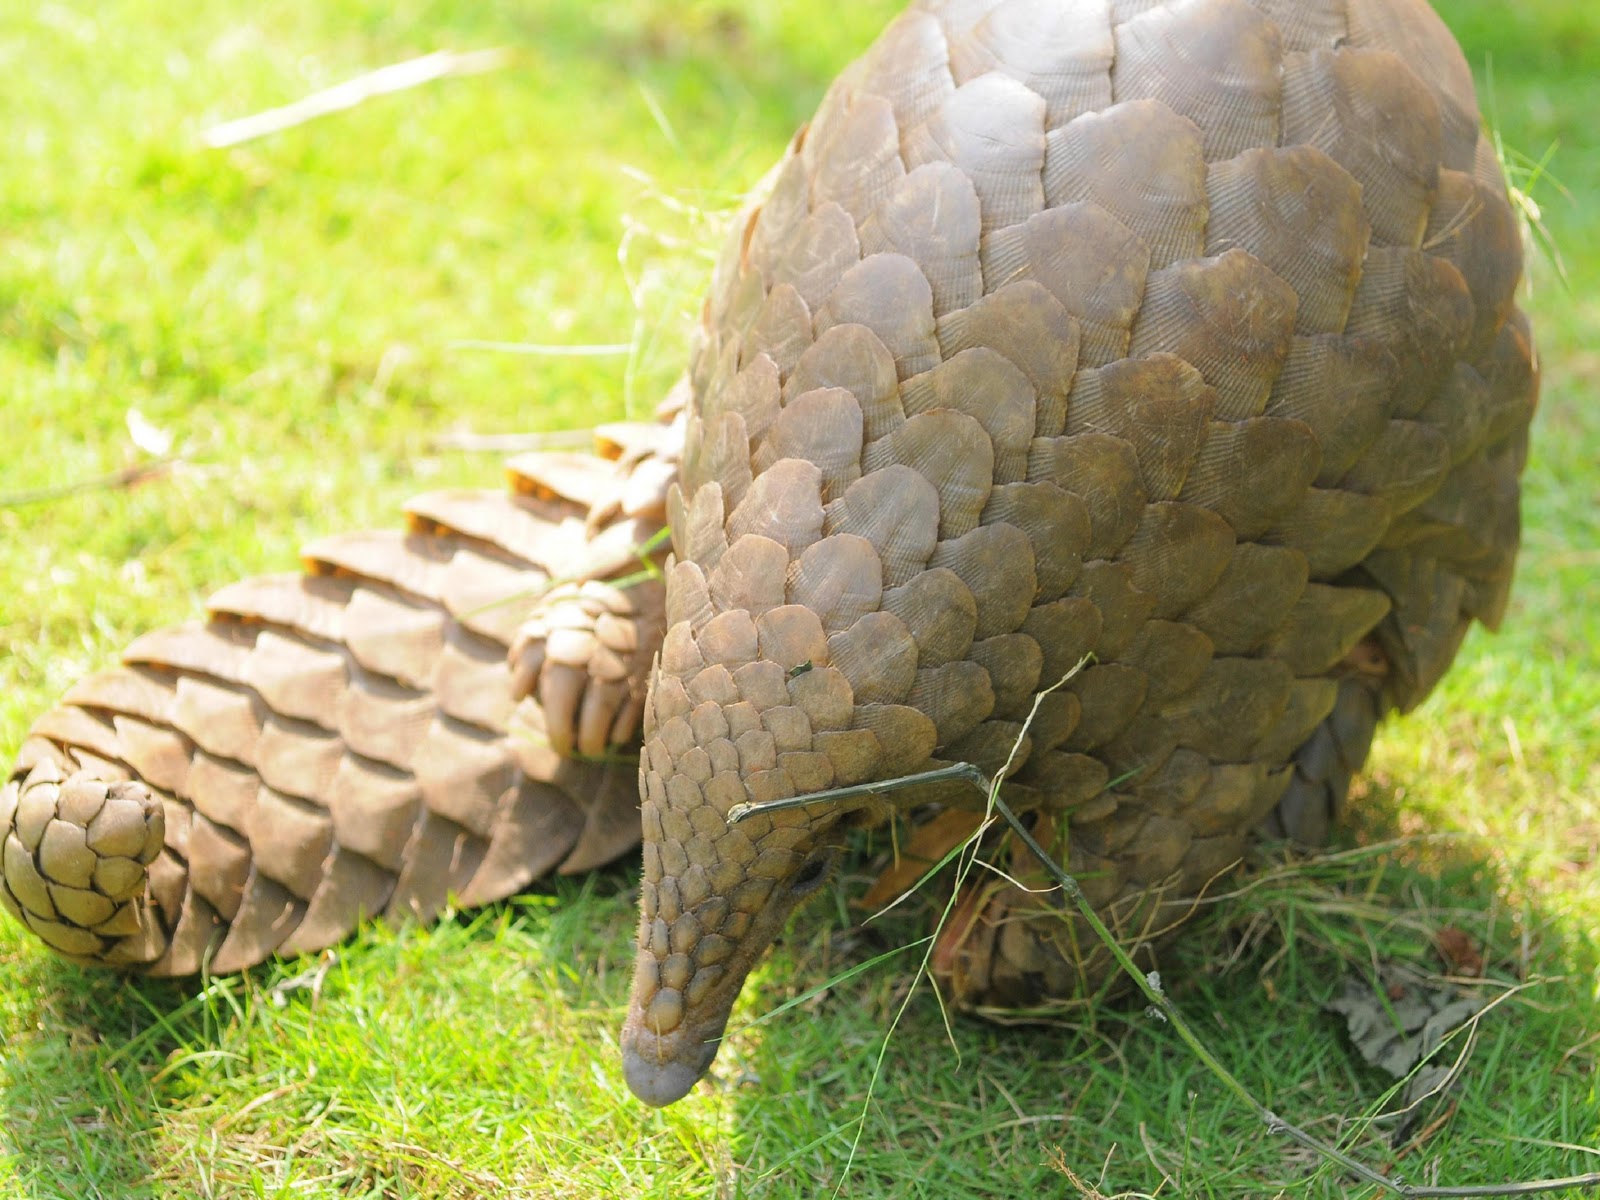 ENCYCLOPEDIA OF ANIMAL FACTS AND PICTURES: Pangolins1600 x 1200